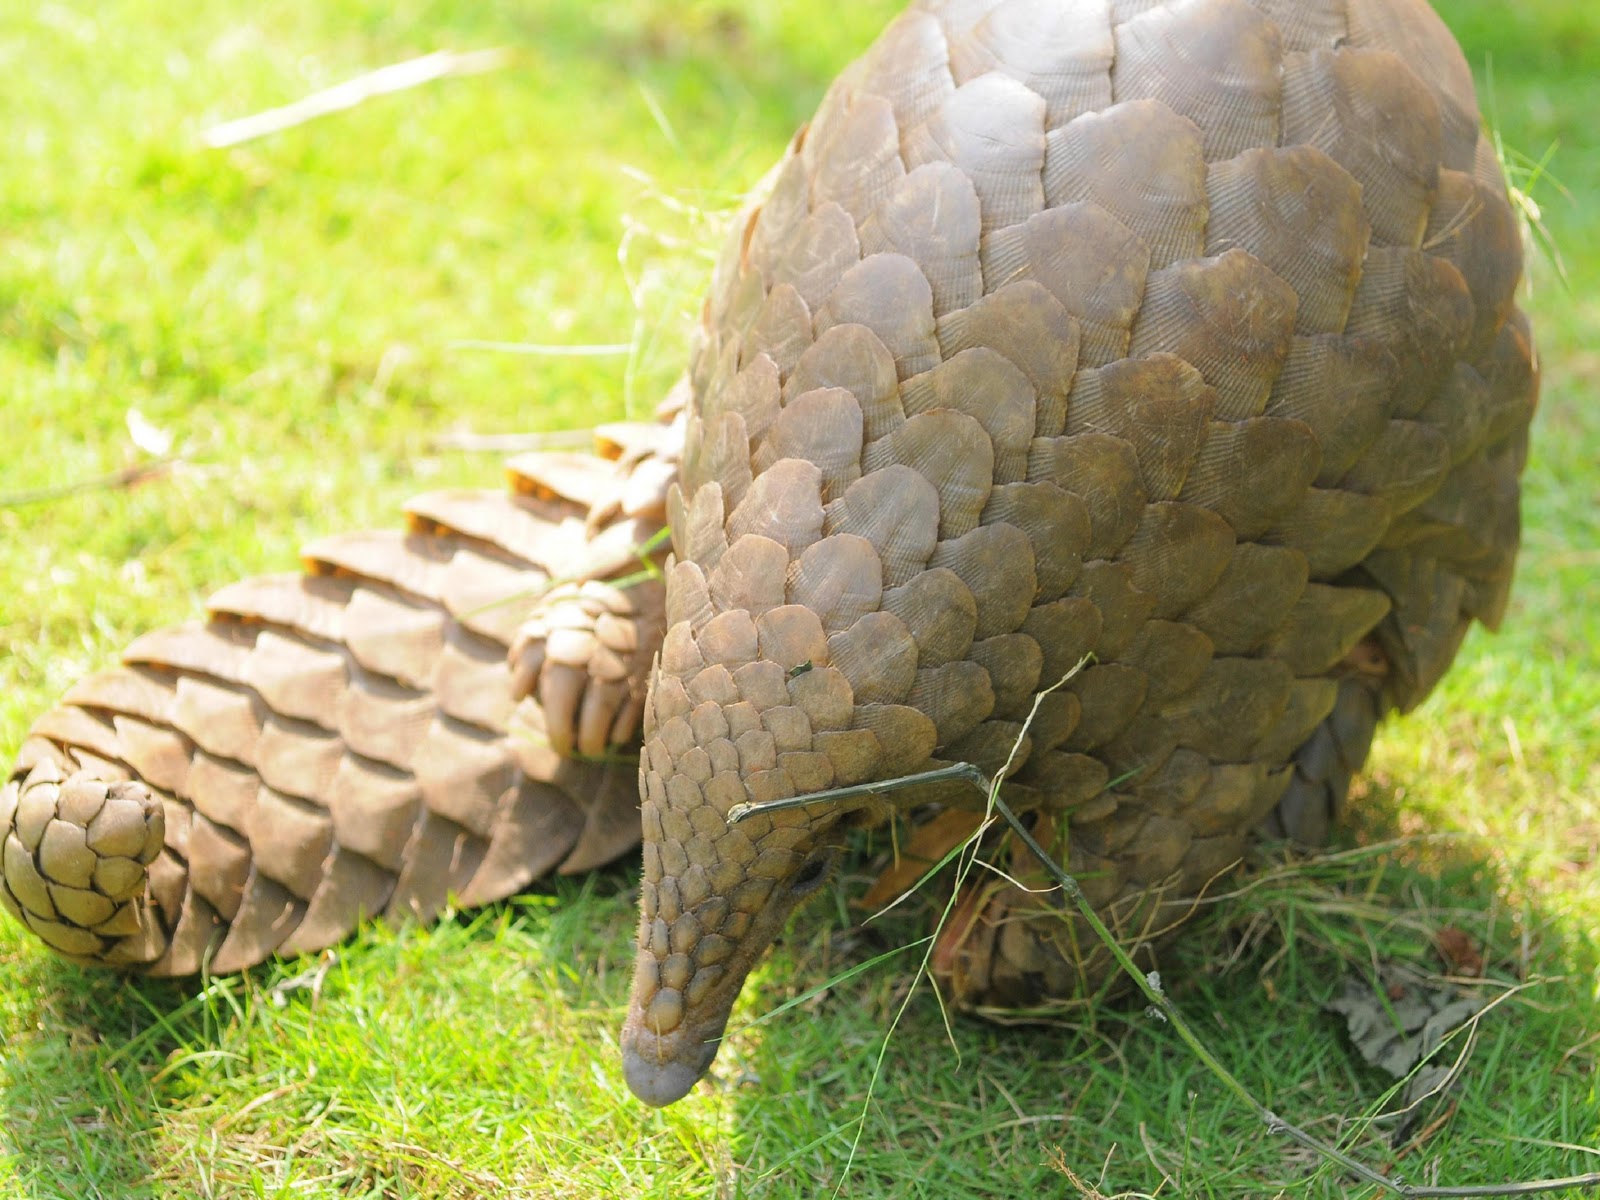 ENCYCLOPEDIA OF ANIMAL FACTS AND PICTURES: Pangolins1600 x 1200